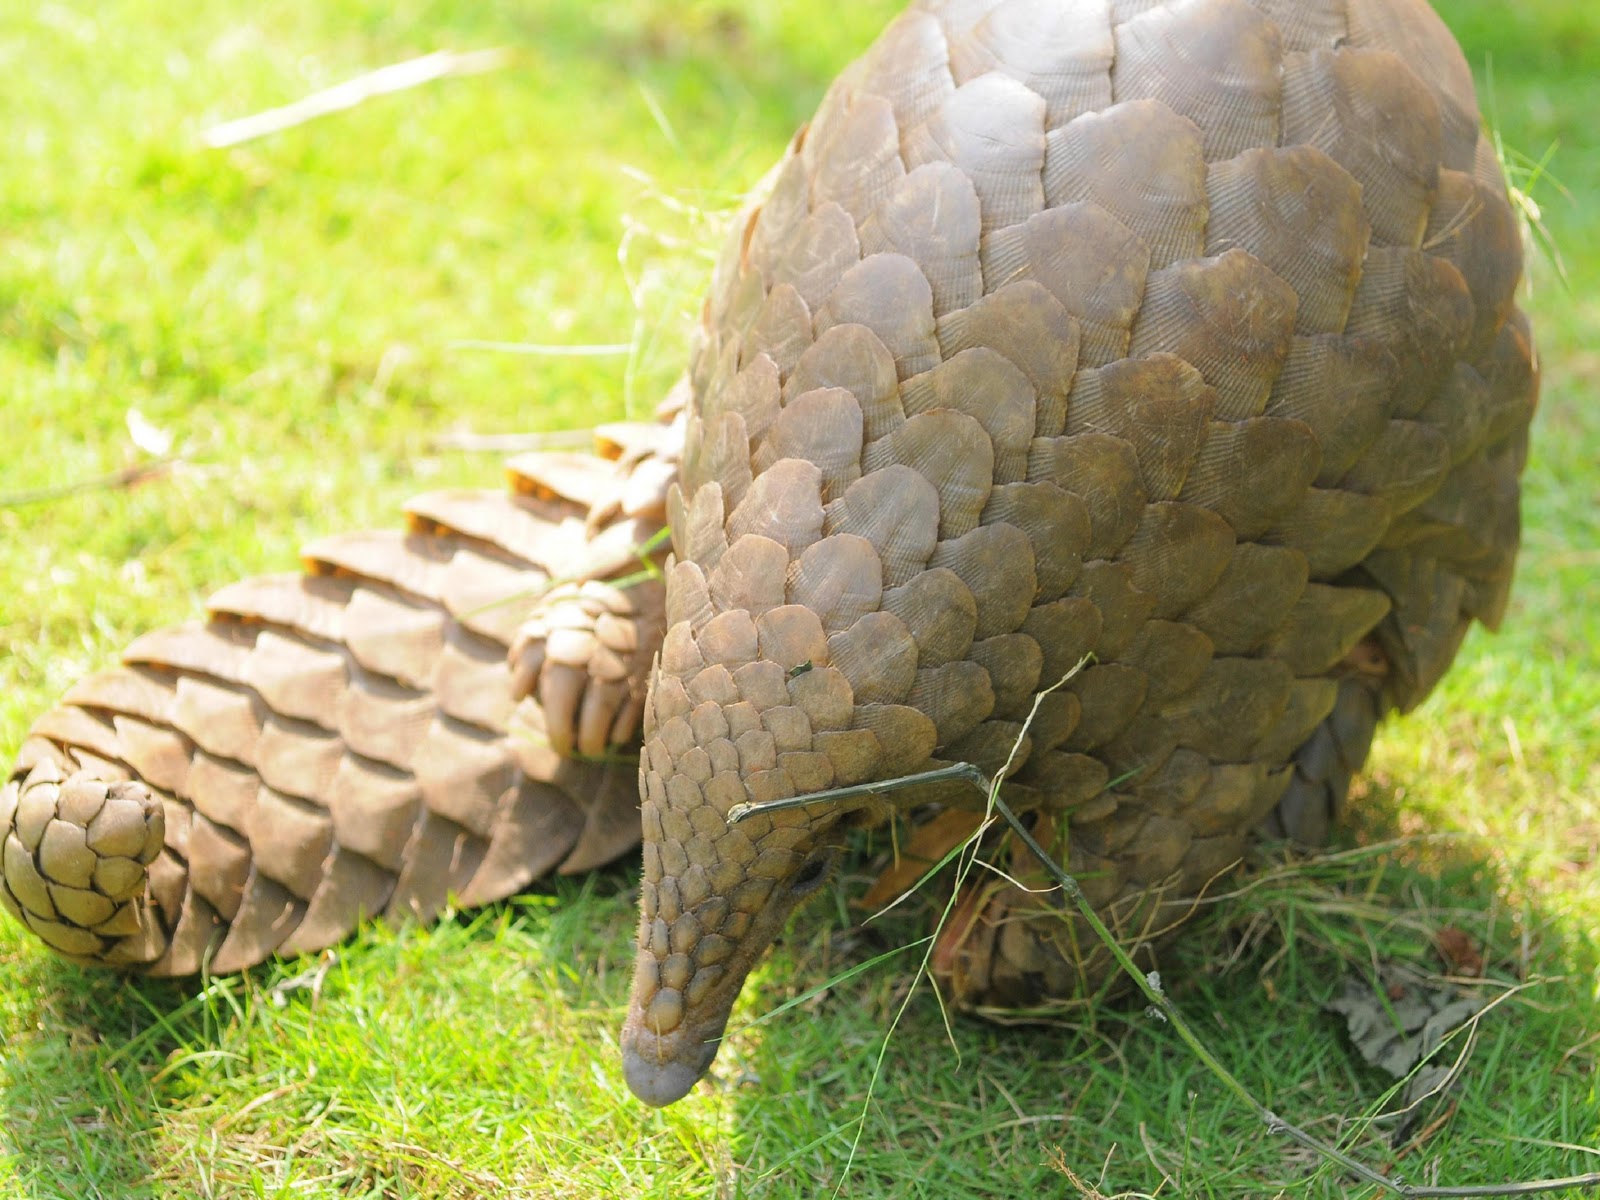 ENCYCLOPEDIA OF ANIMAL FACTS AND PICTURES: Pangolins1600 x 1200